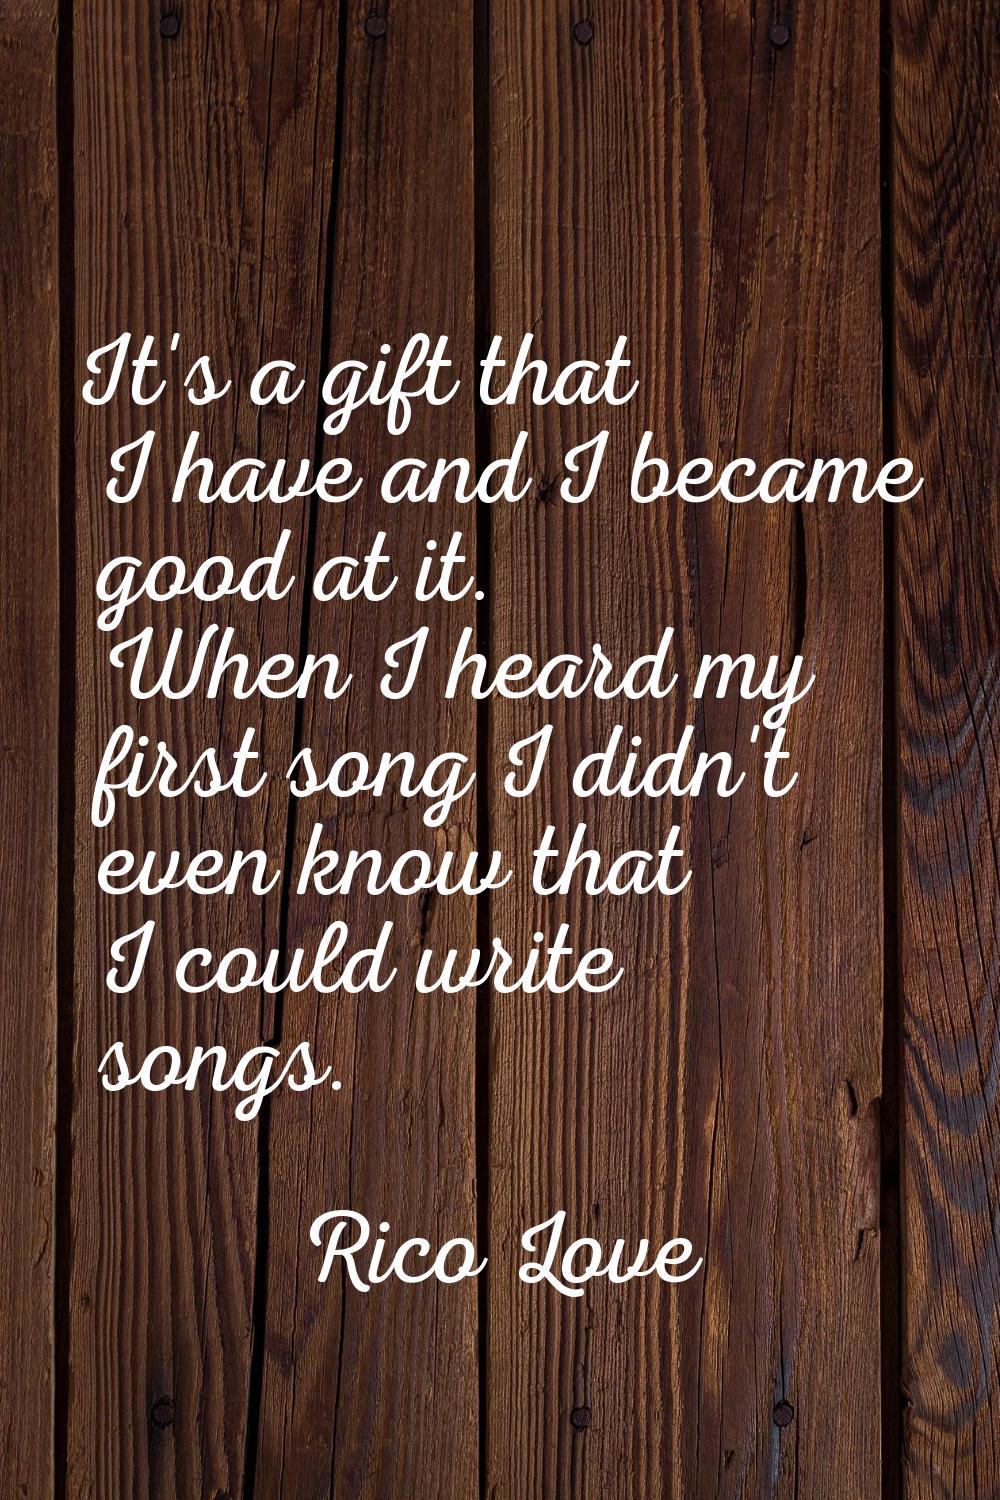 It's a gift that I have and I became good at it. When I heard my first song I didn't even know that